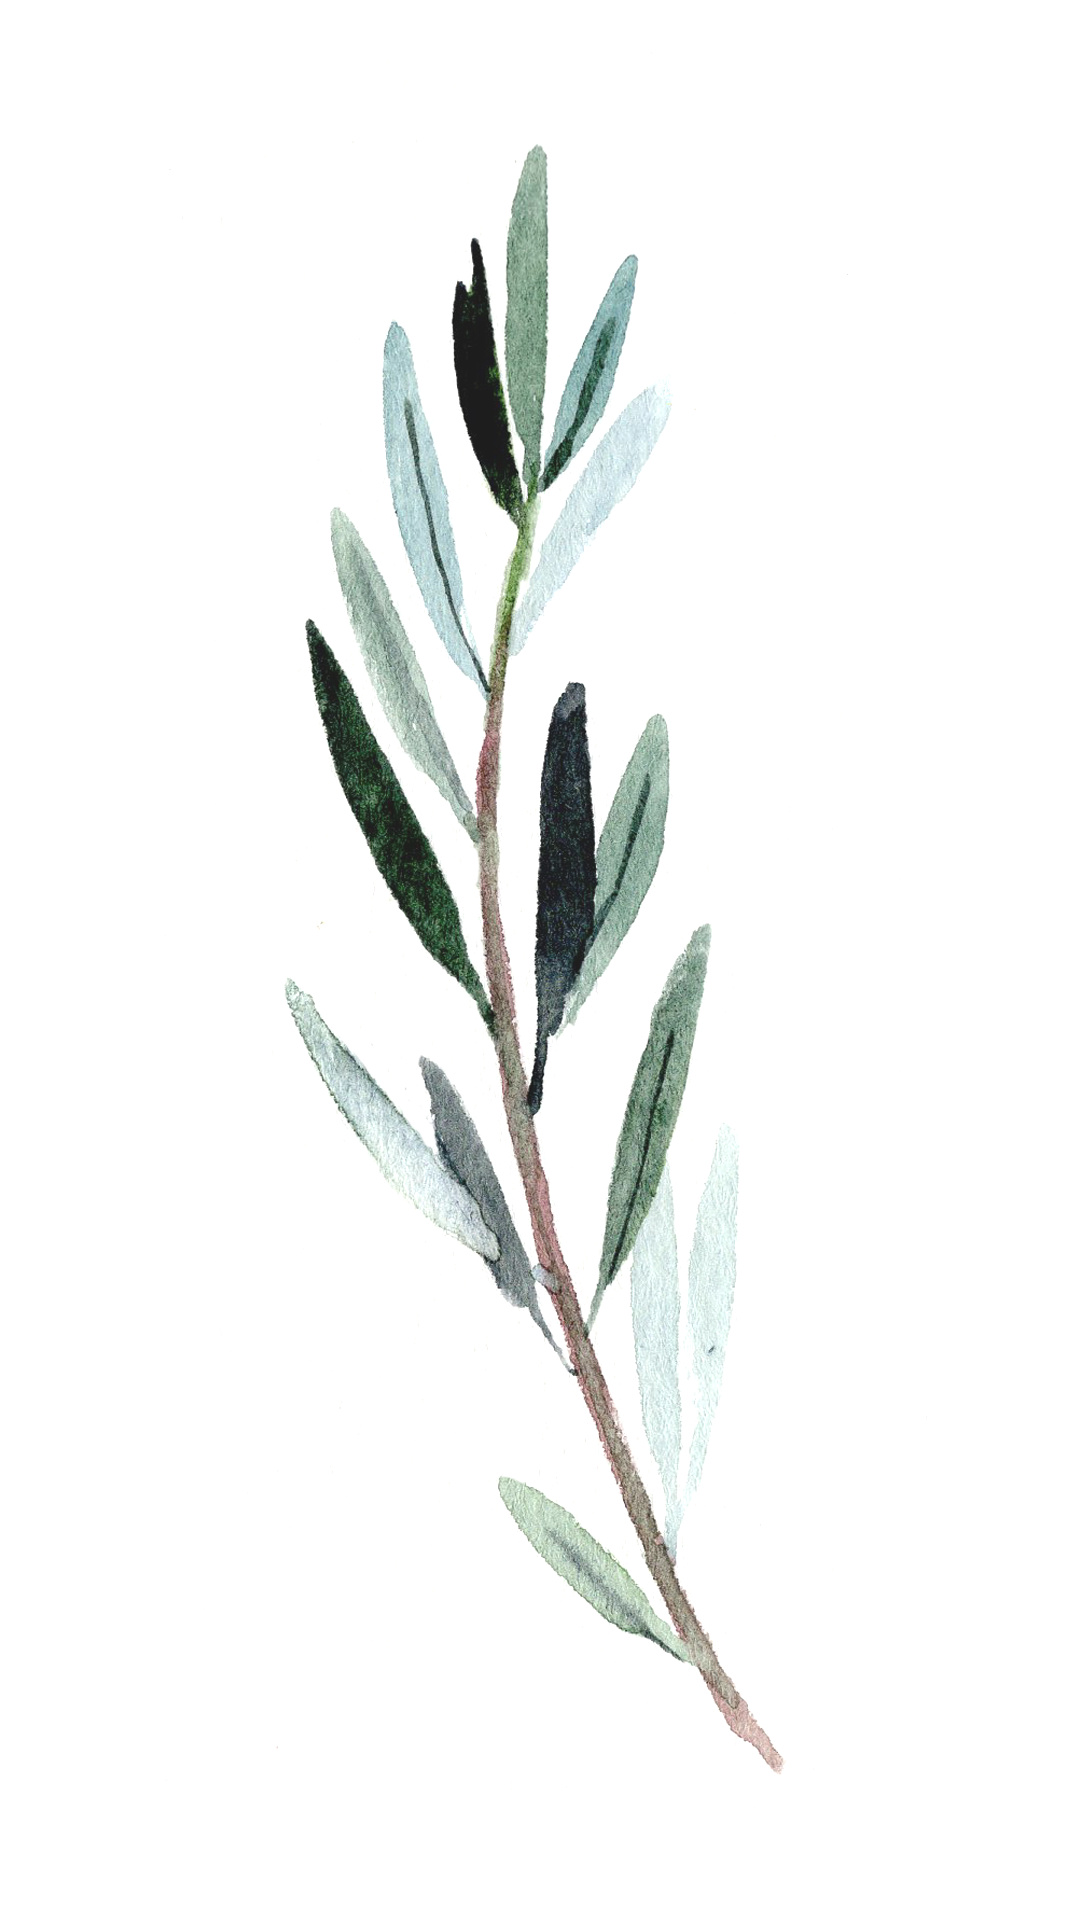 Olive: The leaves are evergreen and have a silvery-green color on the top. 1080x1920 Full HD Wallpaper.